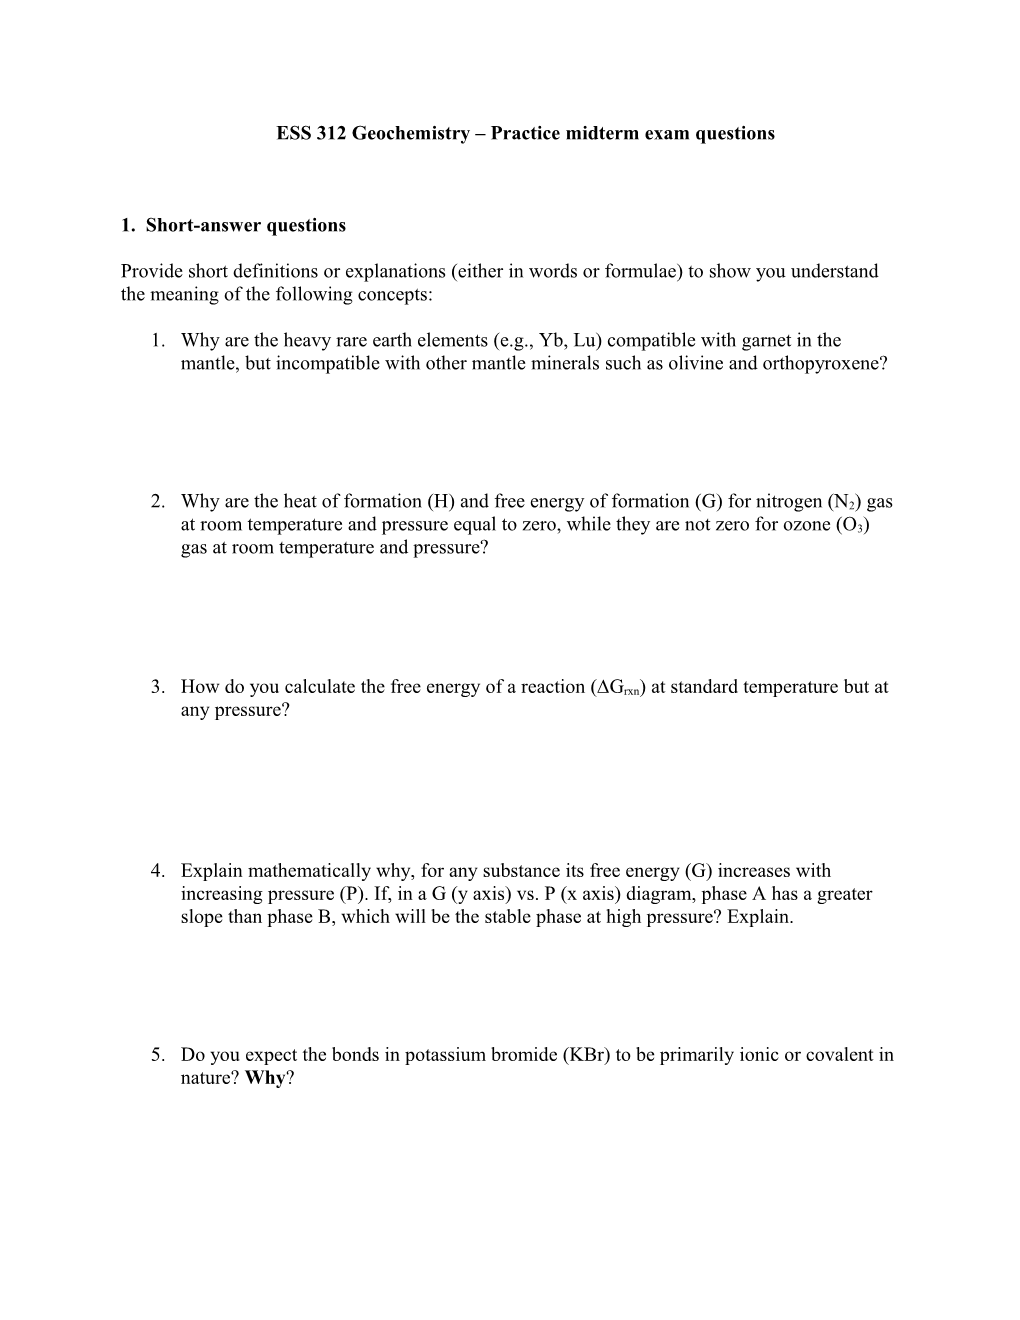 Ideas for Midterm Questions, 2005